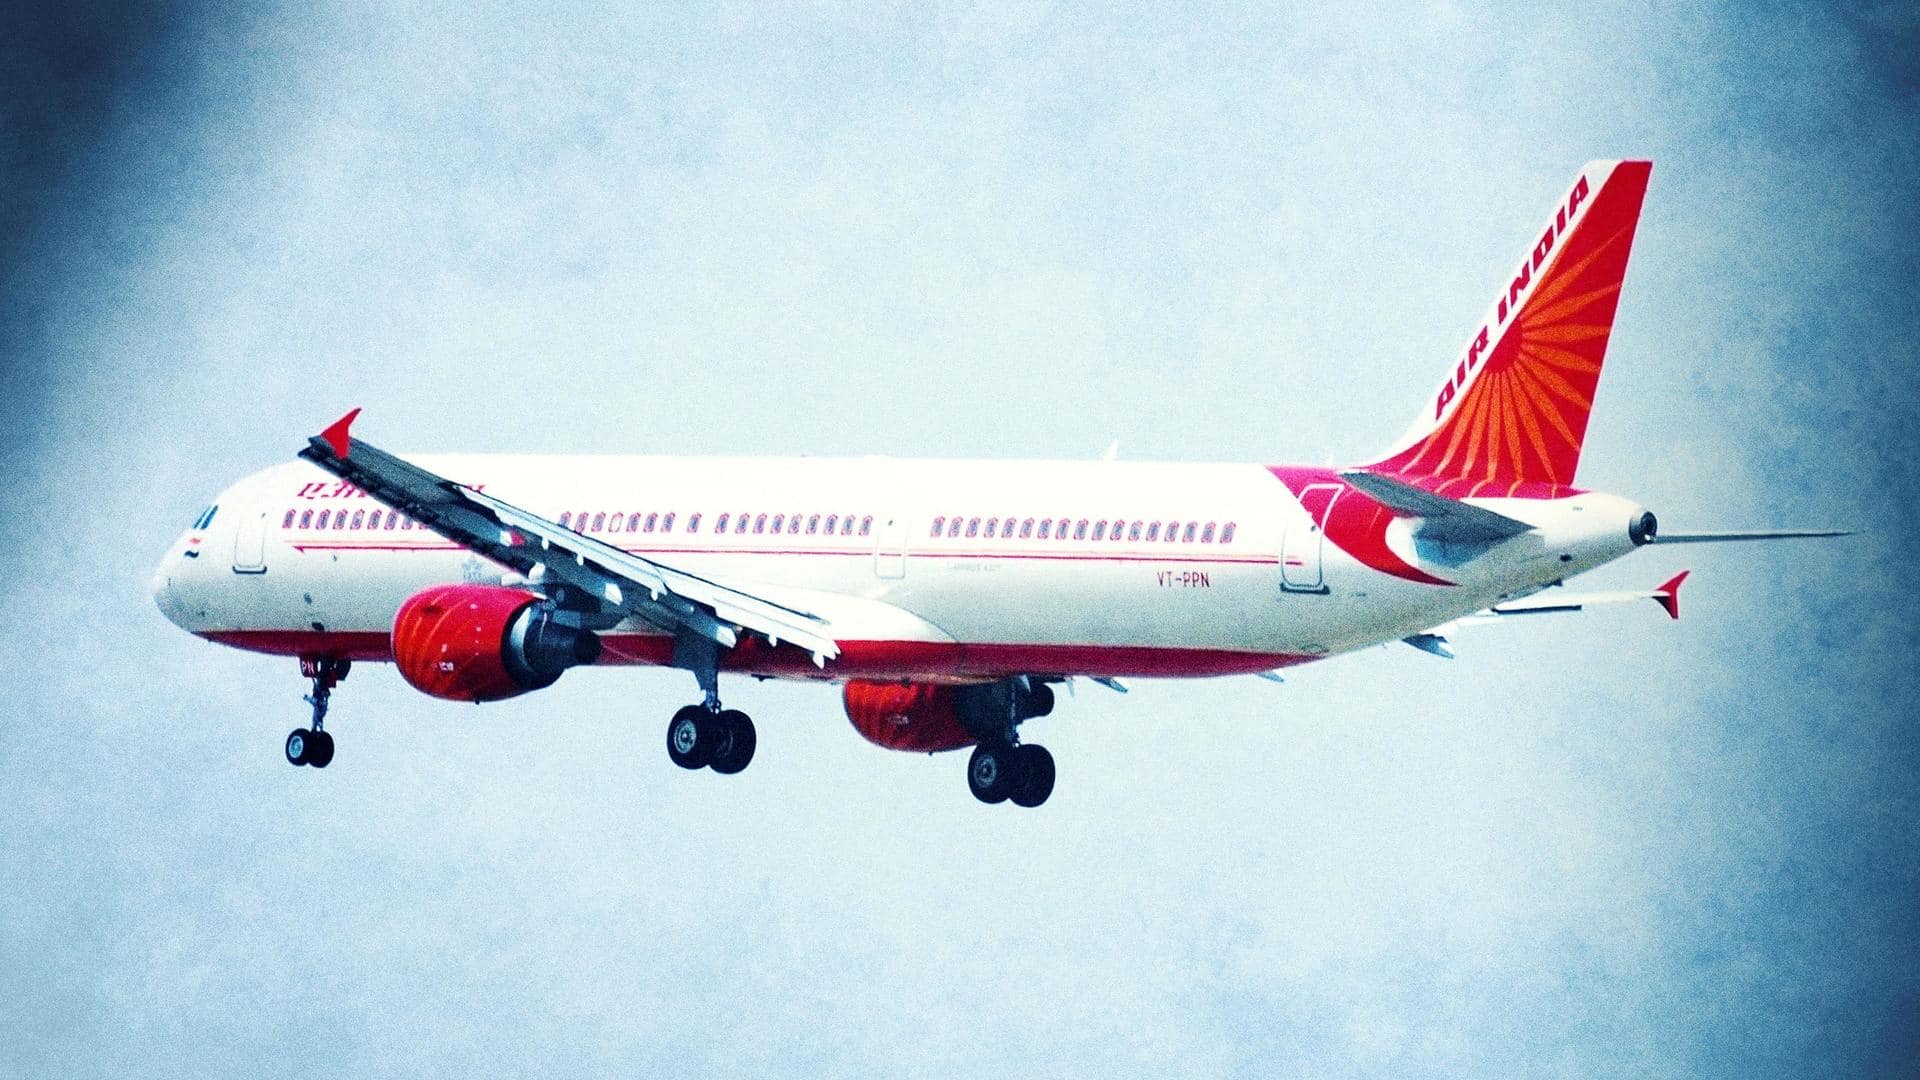 Air India sending ferry flight to Russia for stranded passengers